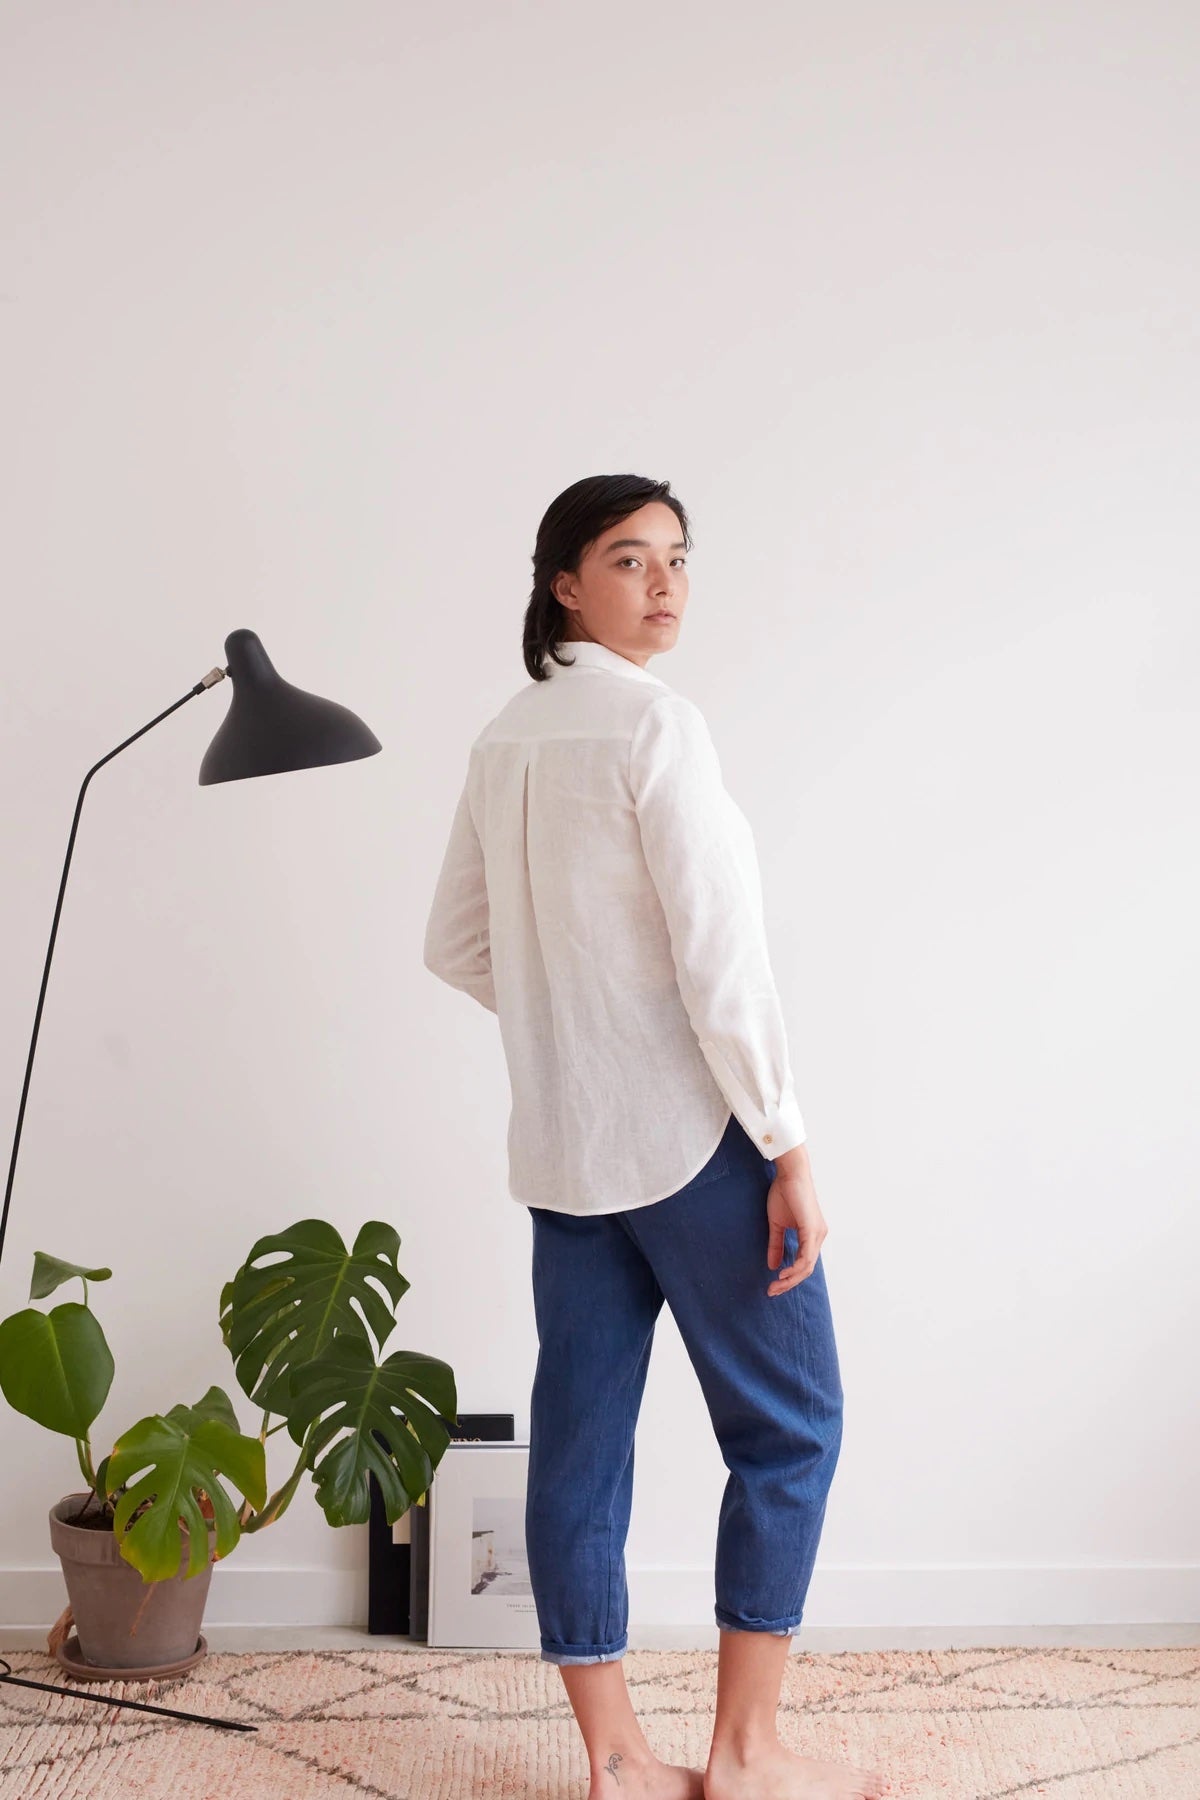 The Modern Sewing Co. Classic Shirt